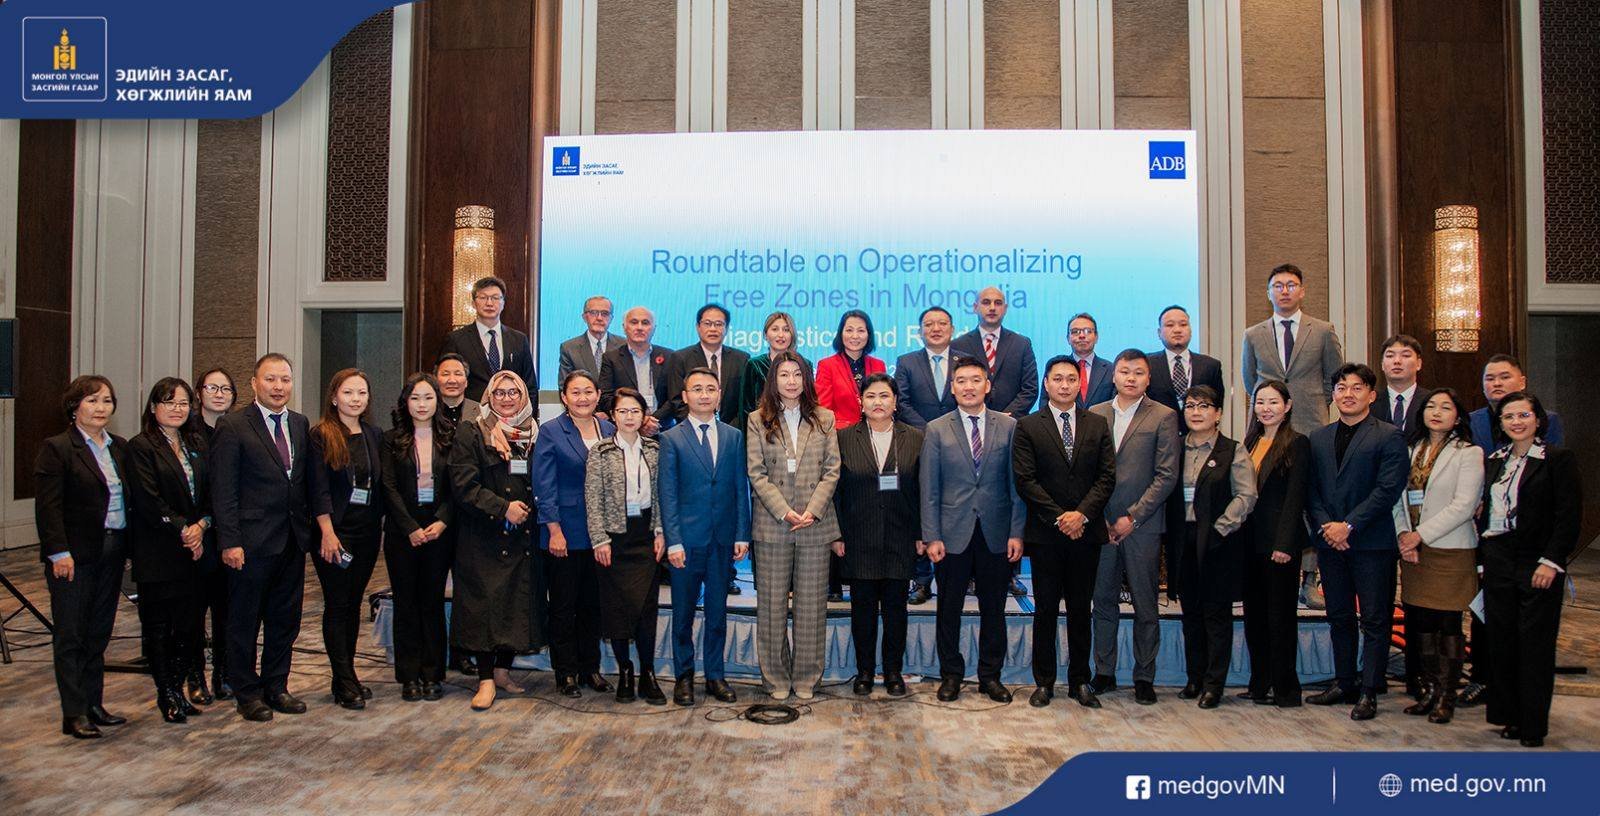 ROUNDTABLE ON OPERATIONALIZING FREE ZONES IN MONGOLIA WAS HELD SUCCESSFULLY